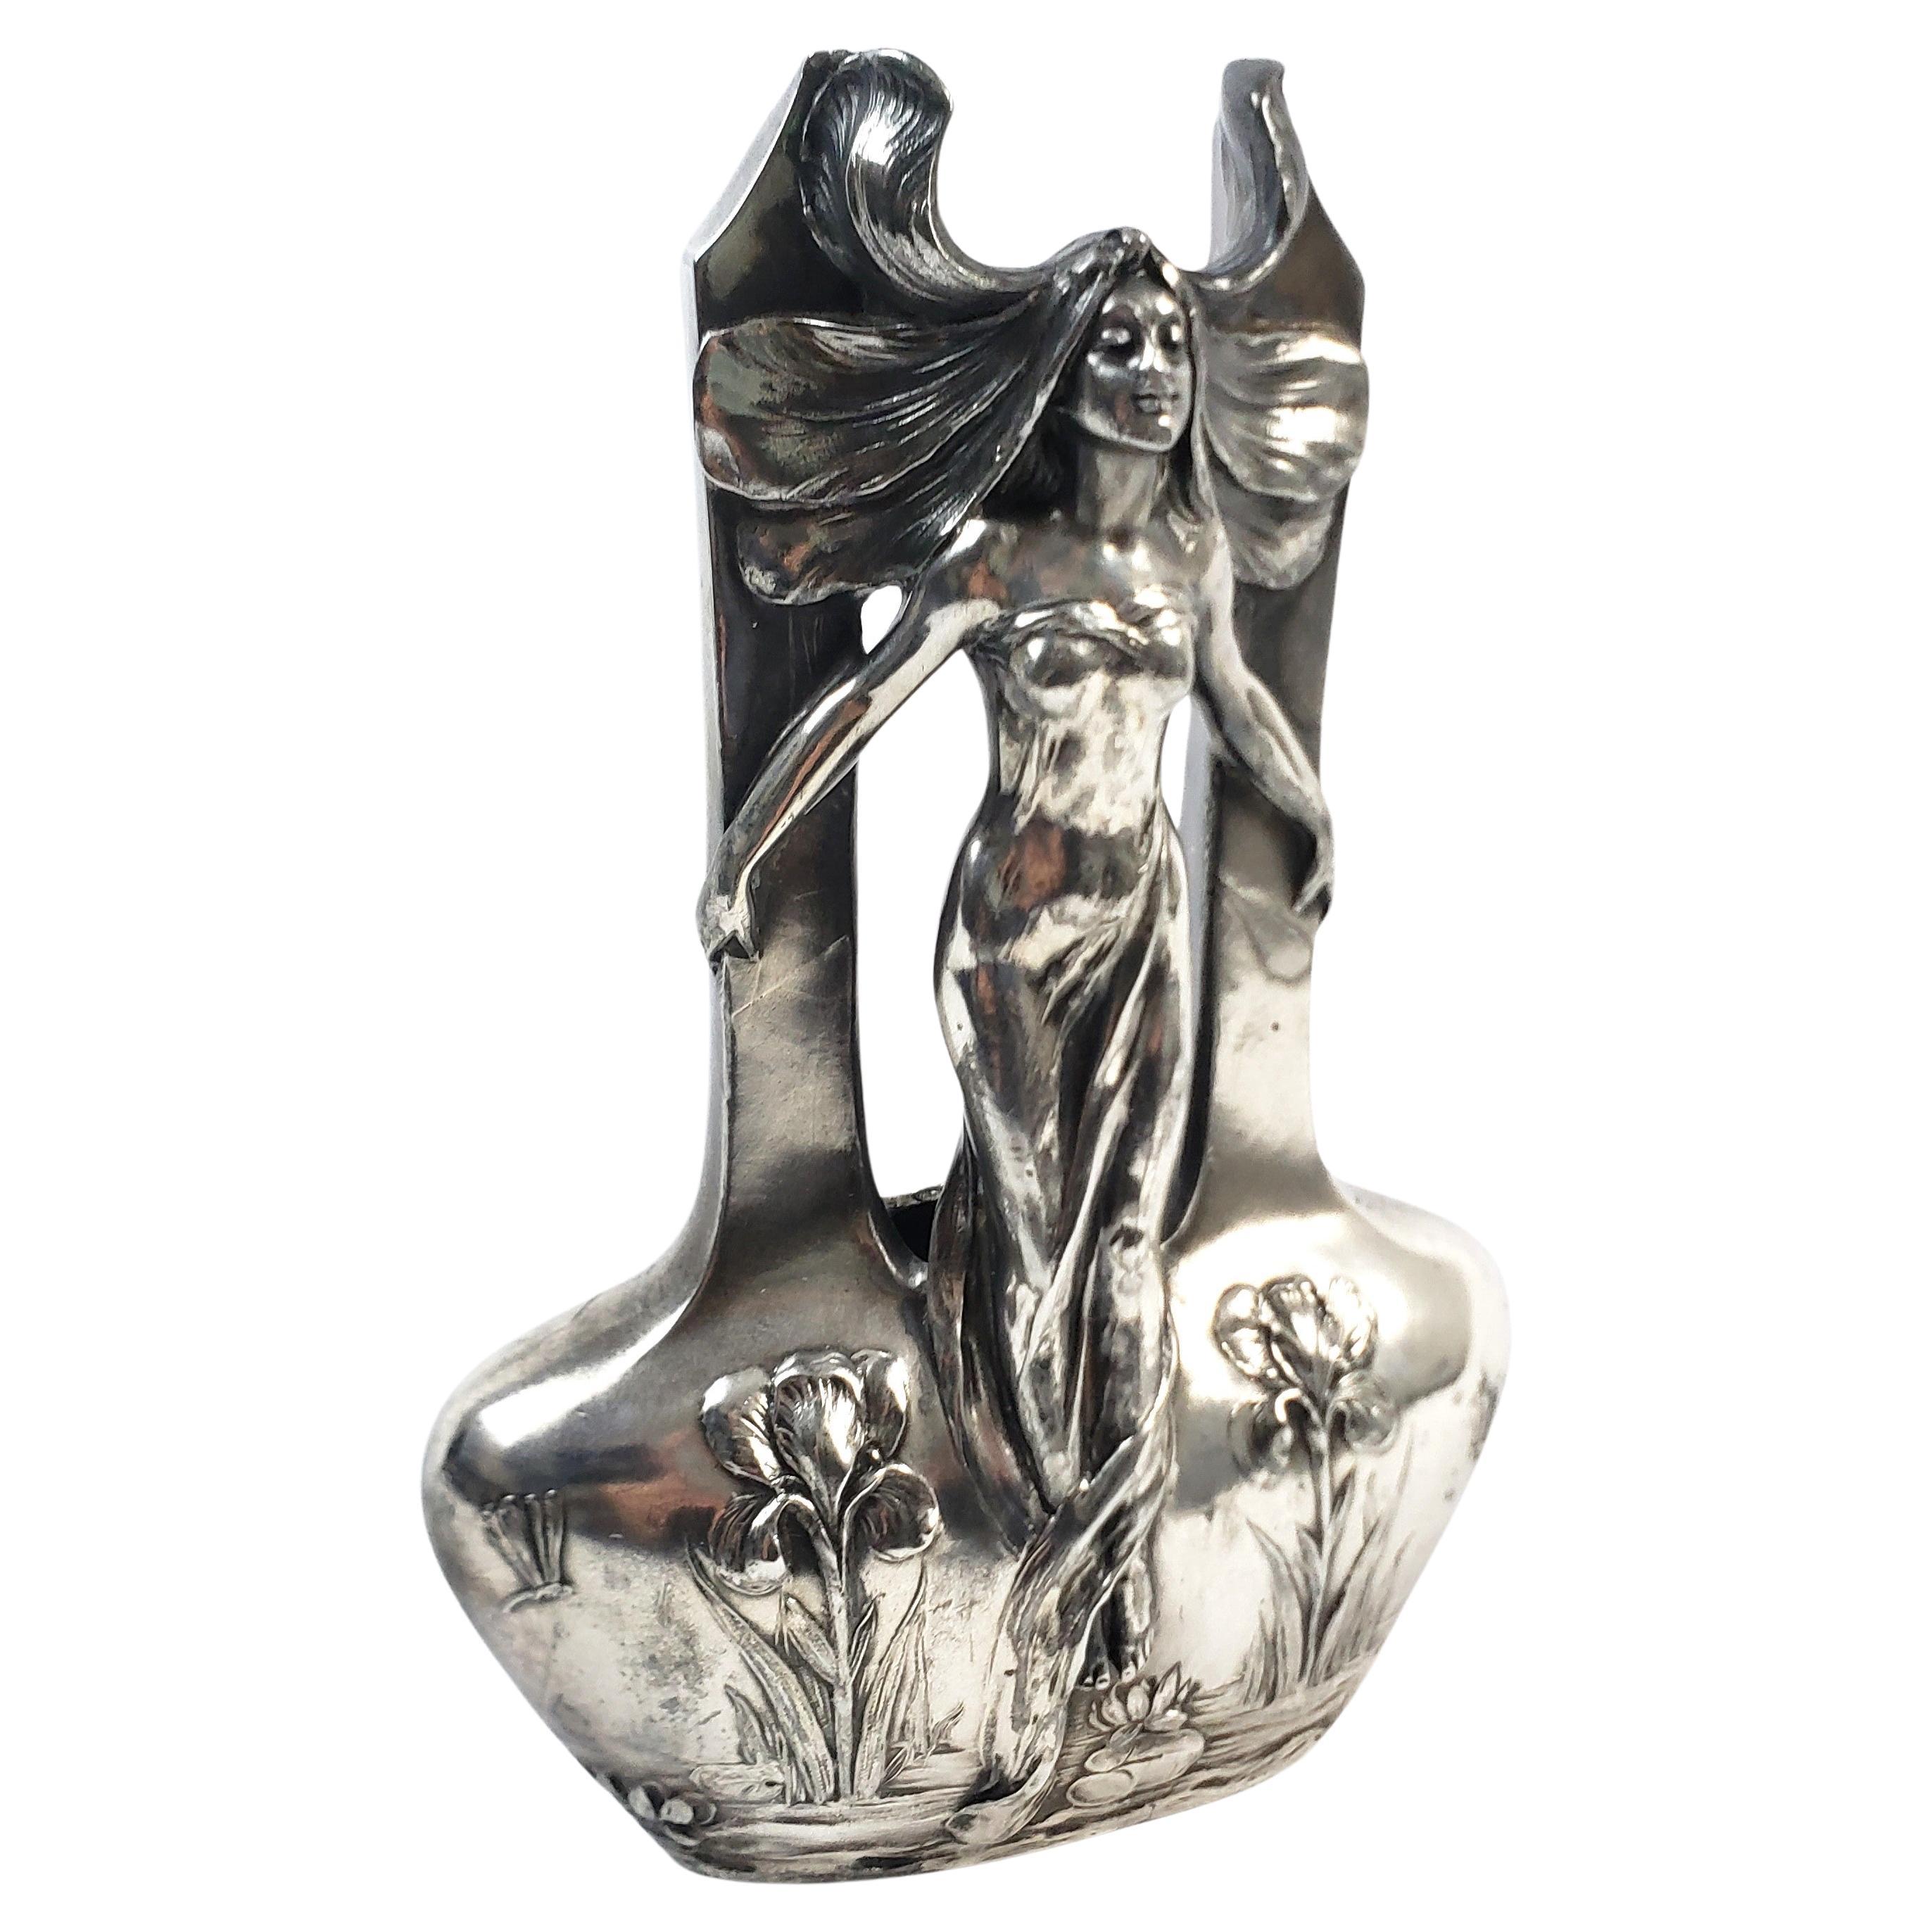 This antique vase is unsigned but presumed to have originated from the United States and date to approximately 1900 and done in the period Art Nouveau style. The vase is composed of plated spelter and depicts a stylized female with flowing hair